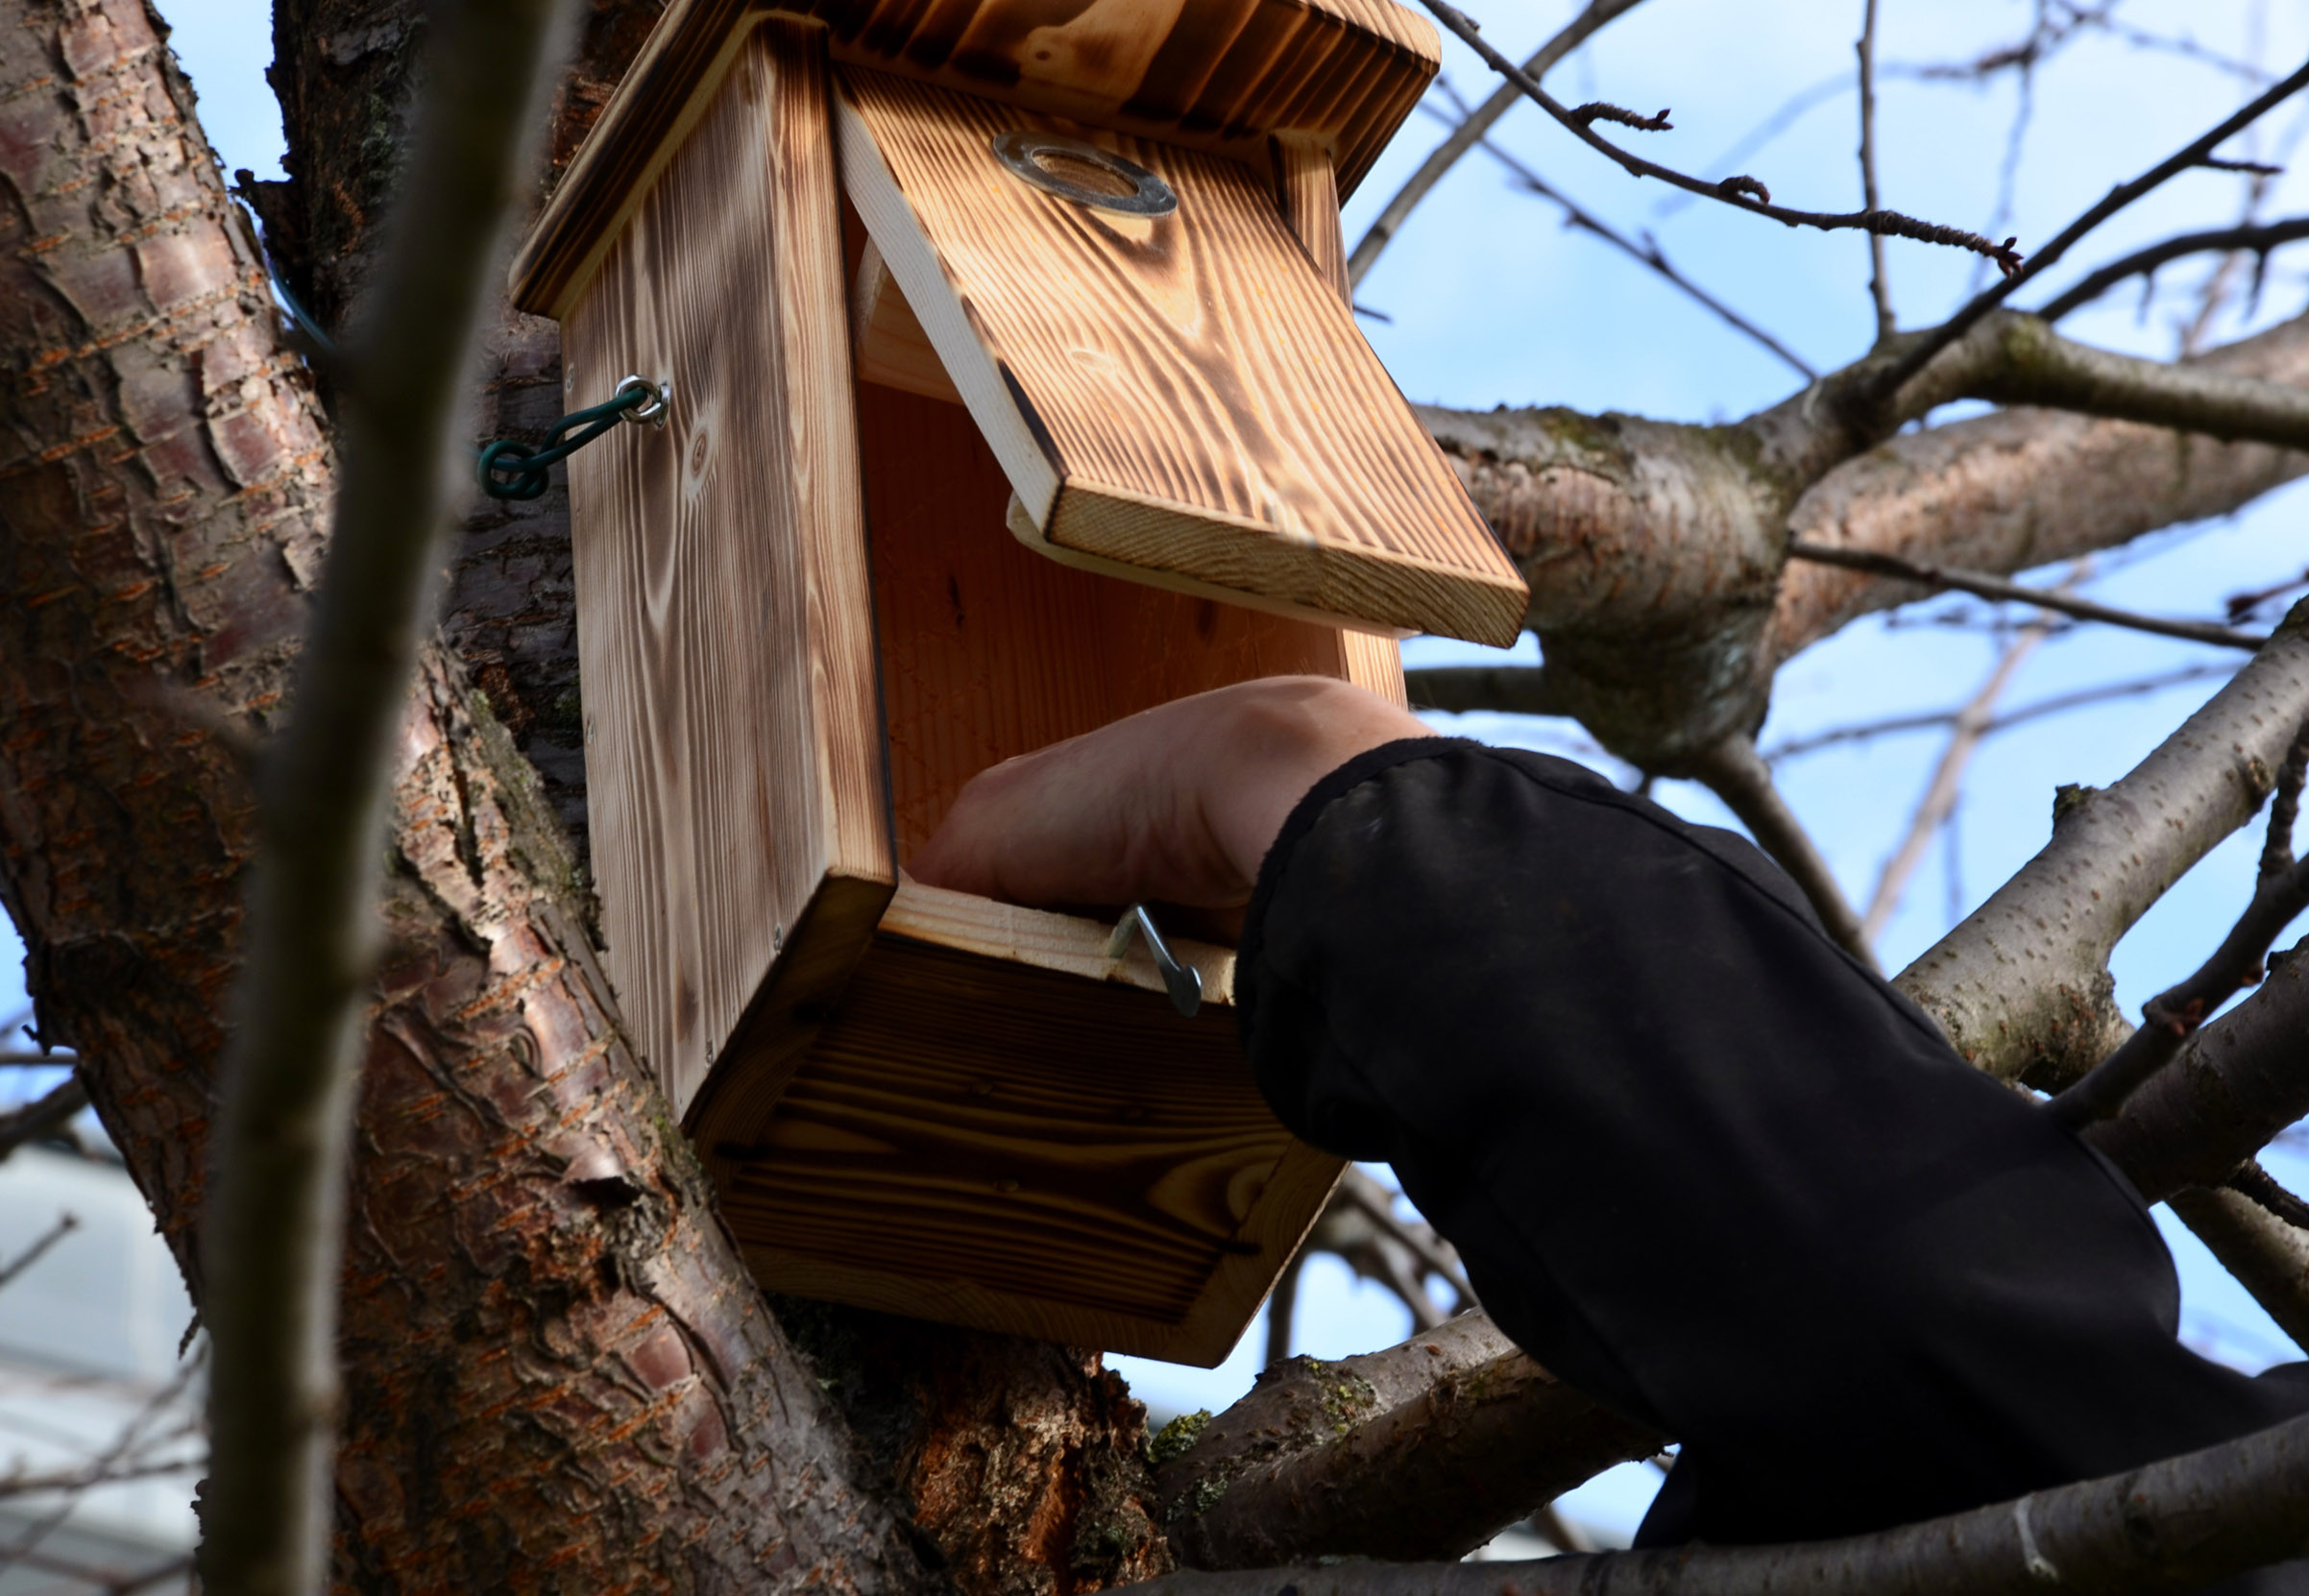 A hand reaching into a wooden nest box, hanging on a tree, to clean it.